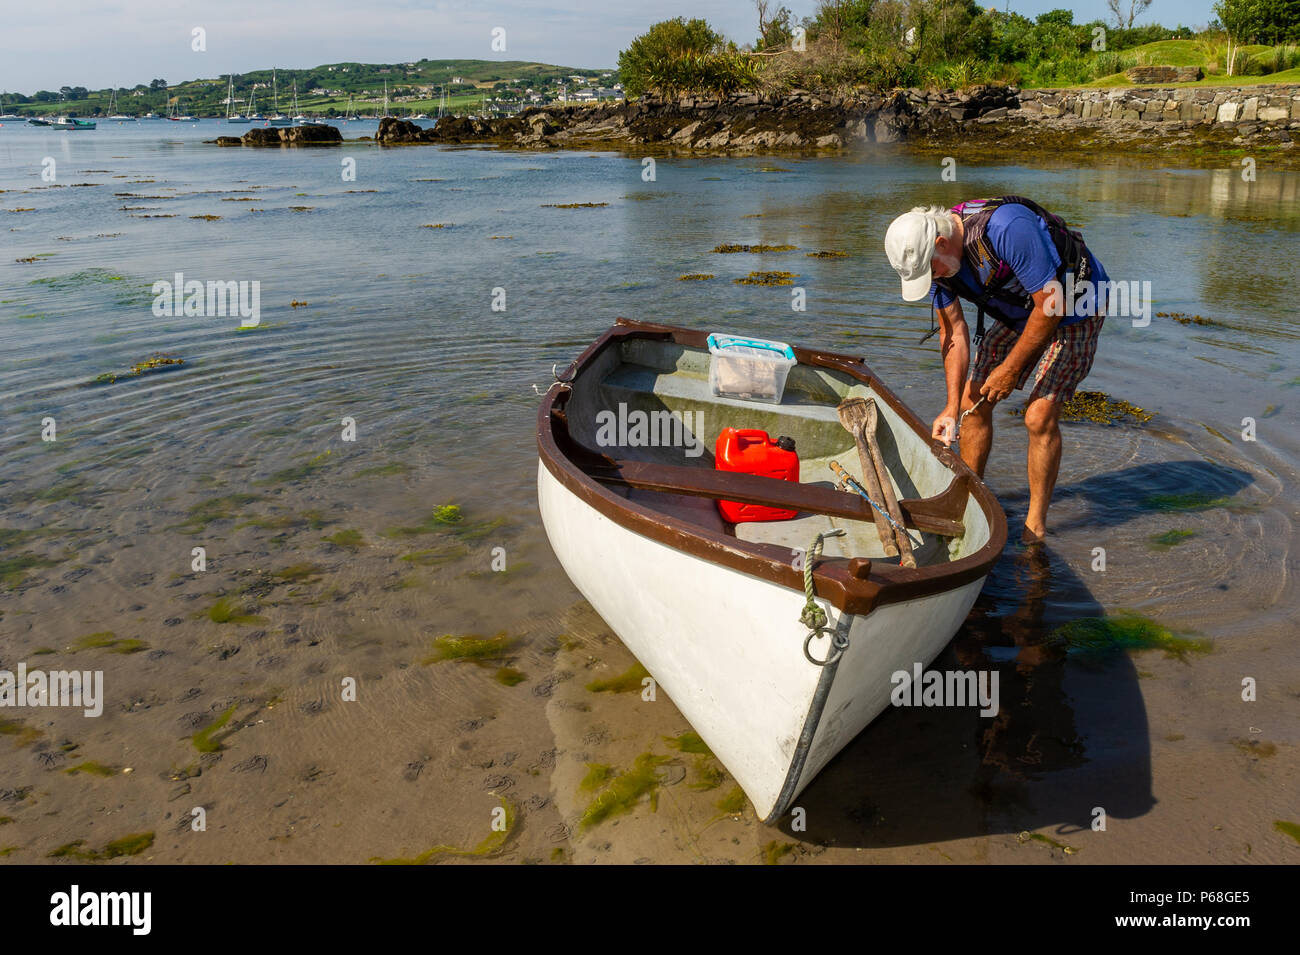 Schull, West Cork, Ireland. 29th June, 2018. A local Schull resident prepares his boat for a day's fishing during the heatwave. Temperatures will remain in the mid 20's Celsius for the rest of the weekend but rain is forecast from Monday onwards. Credit: Andy Gibson/Alamy Live News. Stock Photo